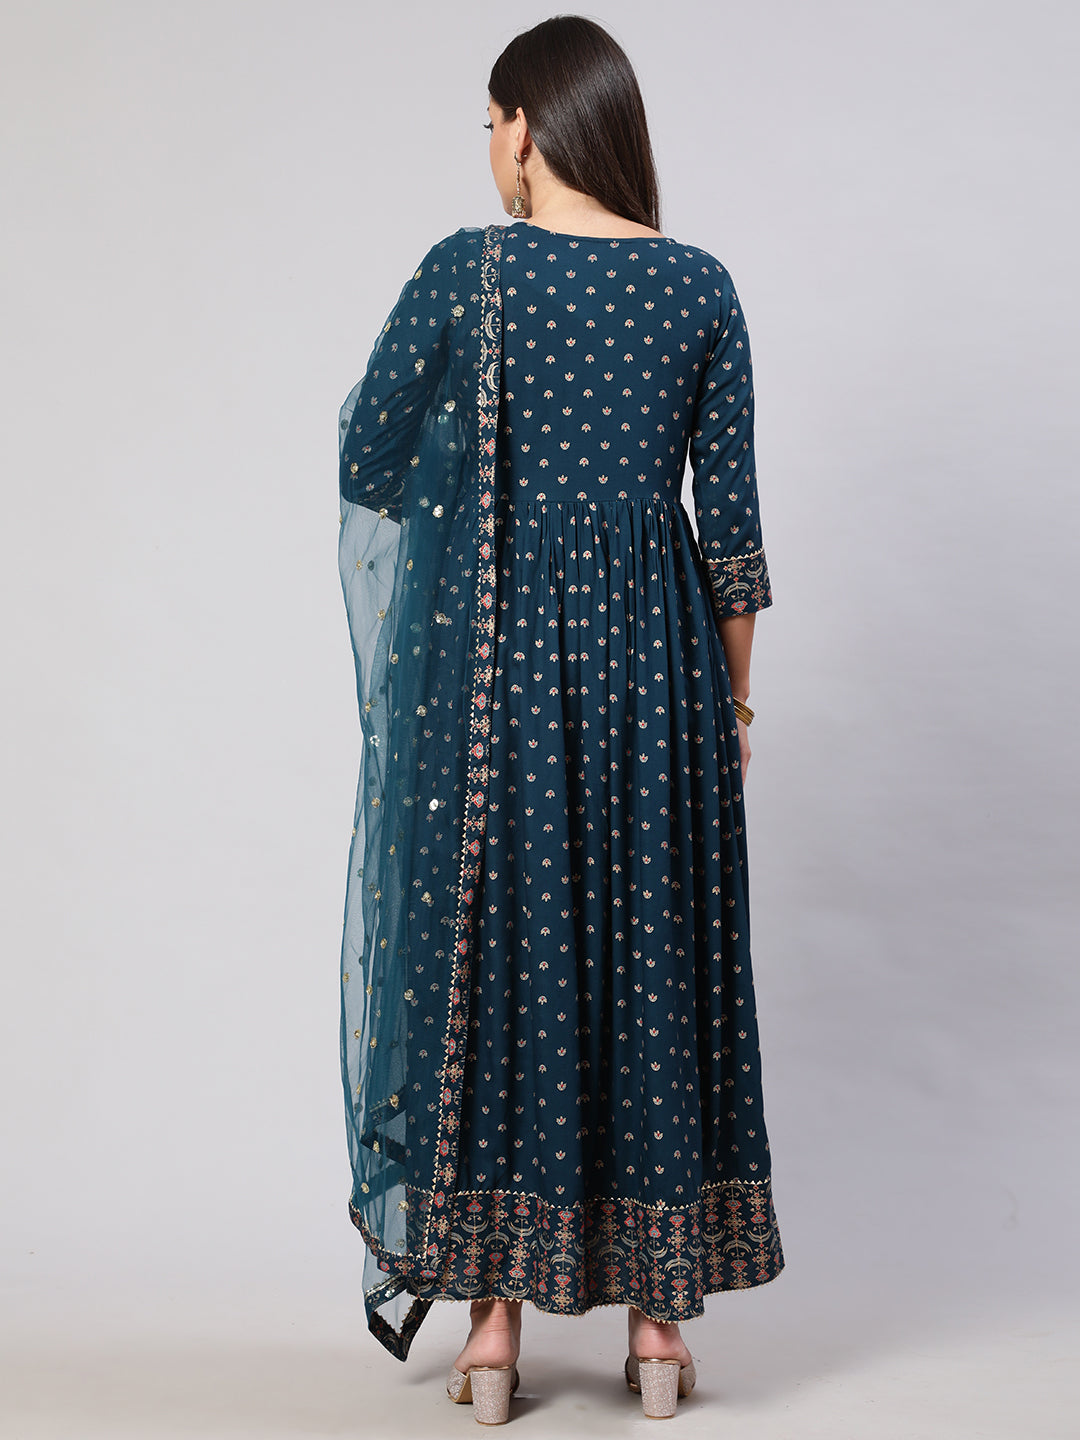 Women's Teal Floral Printed Flared Dress With Scalloped Dupatta - Nayo Clothing